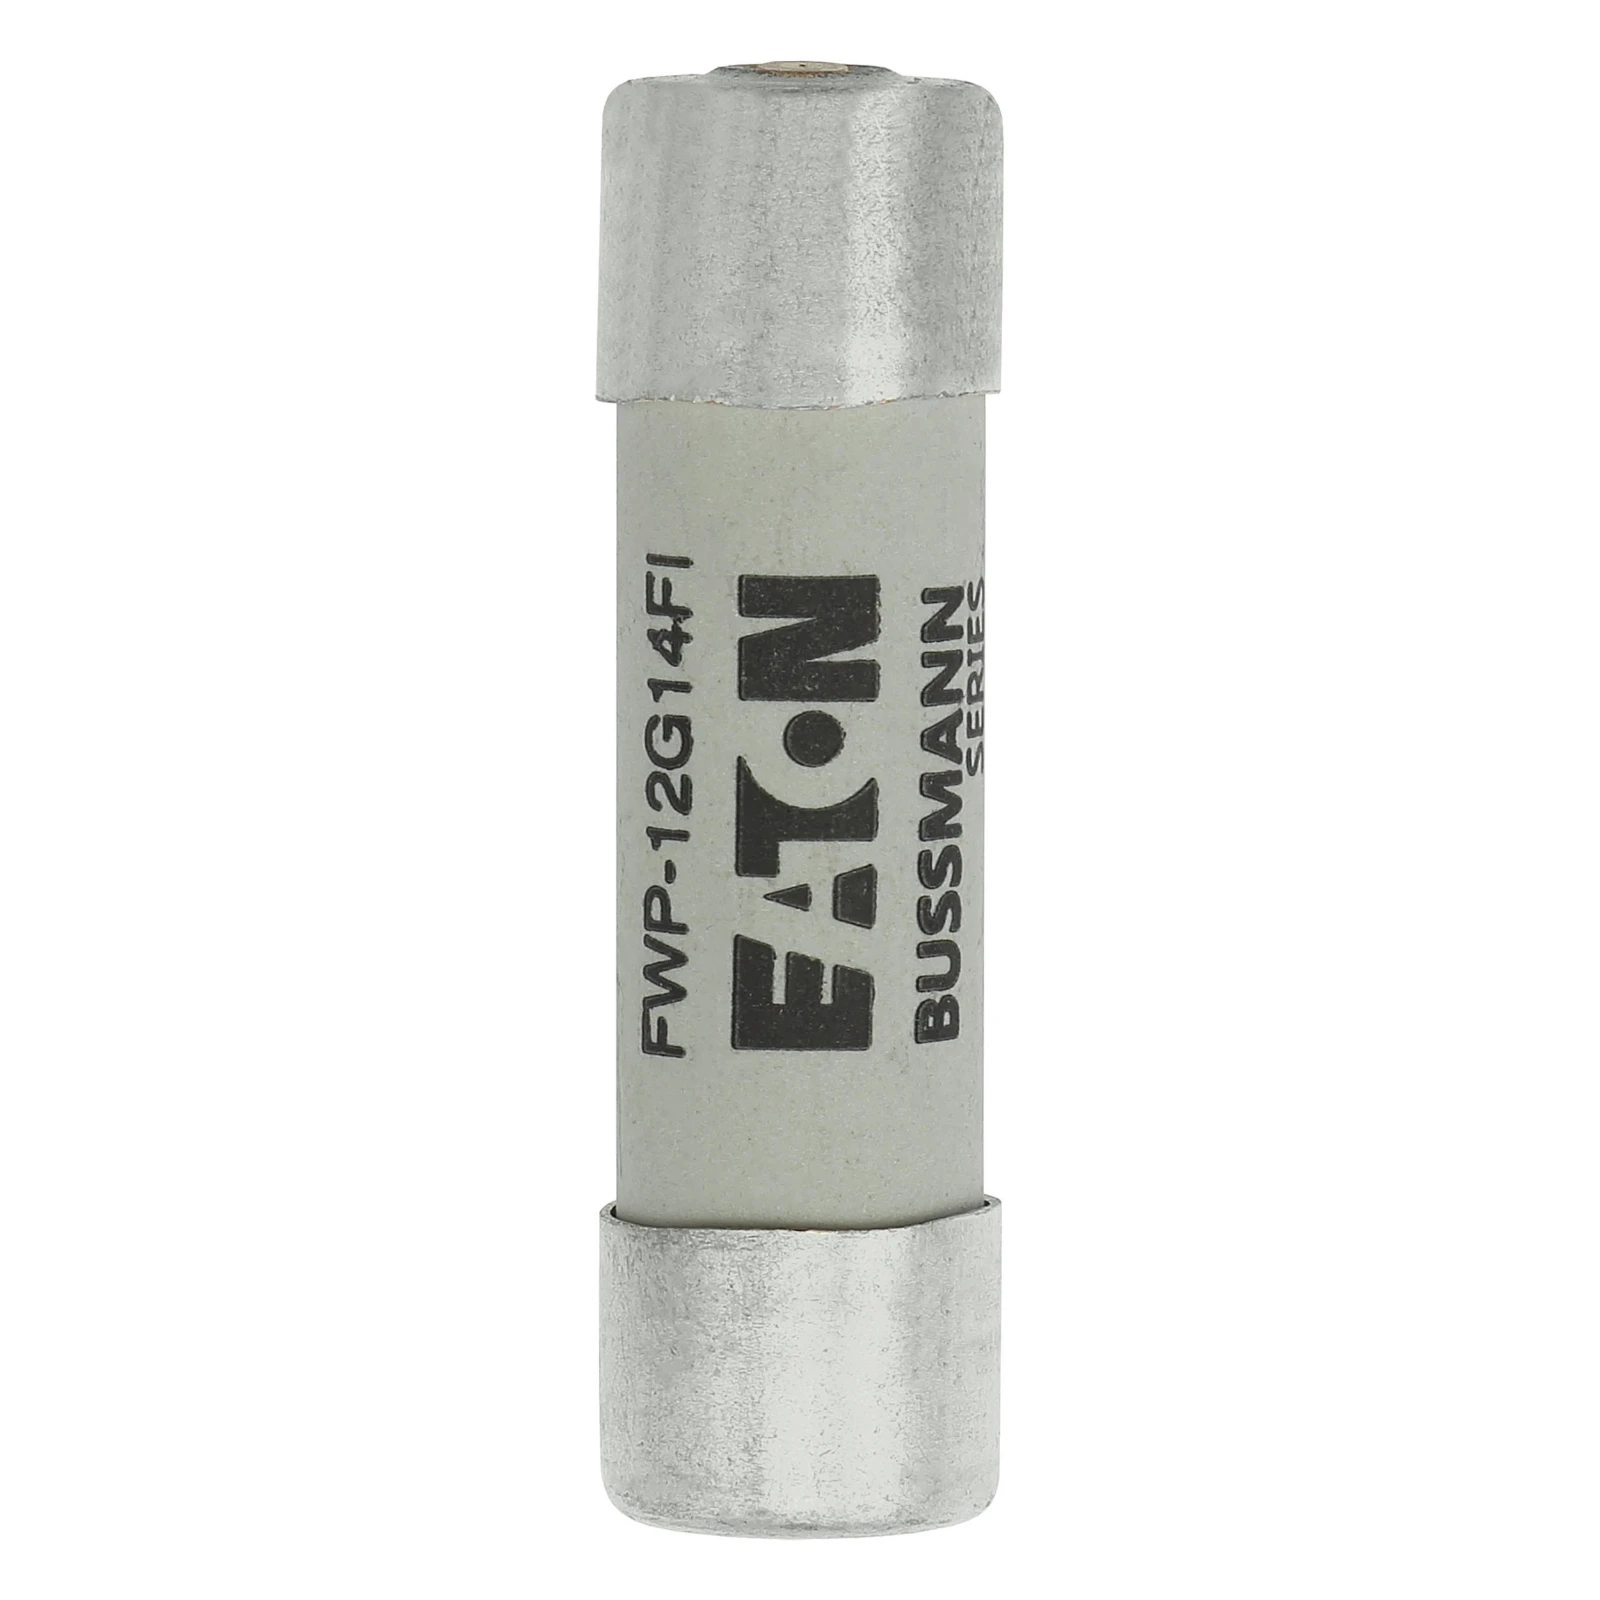 2545495 - Eaton Fuse 12A 690VAC gR 14x51 with Ind